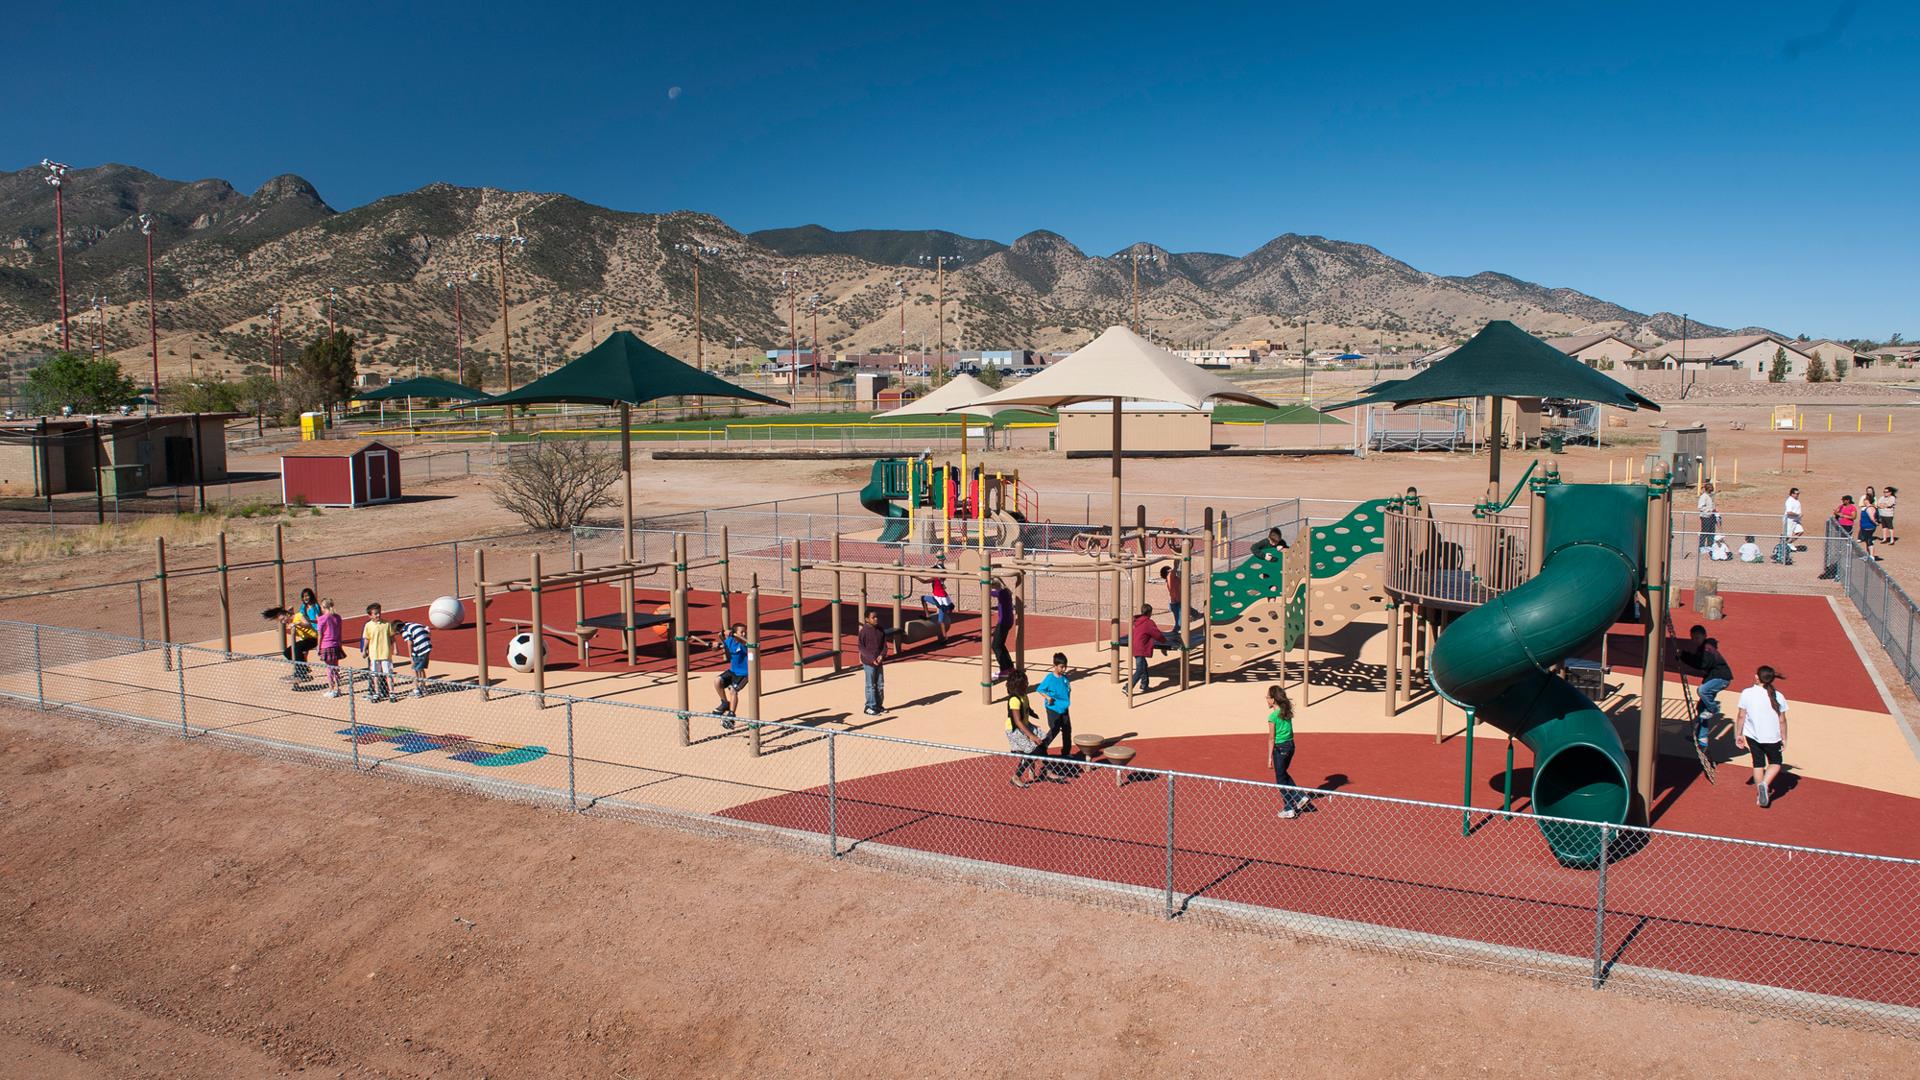 With a mountain range in the background, children play at Sierra Vista Children's Fitness Park. Climbing the PlayBooster play structure. Each area is covered by CoolToppers shade systems.